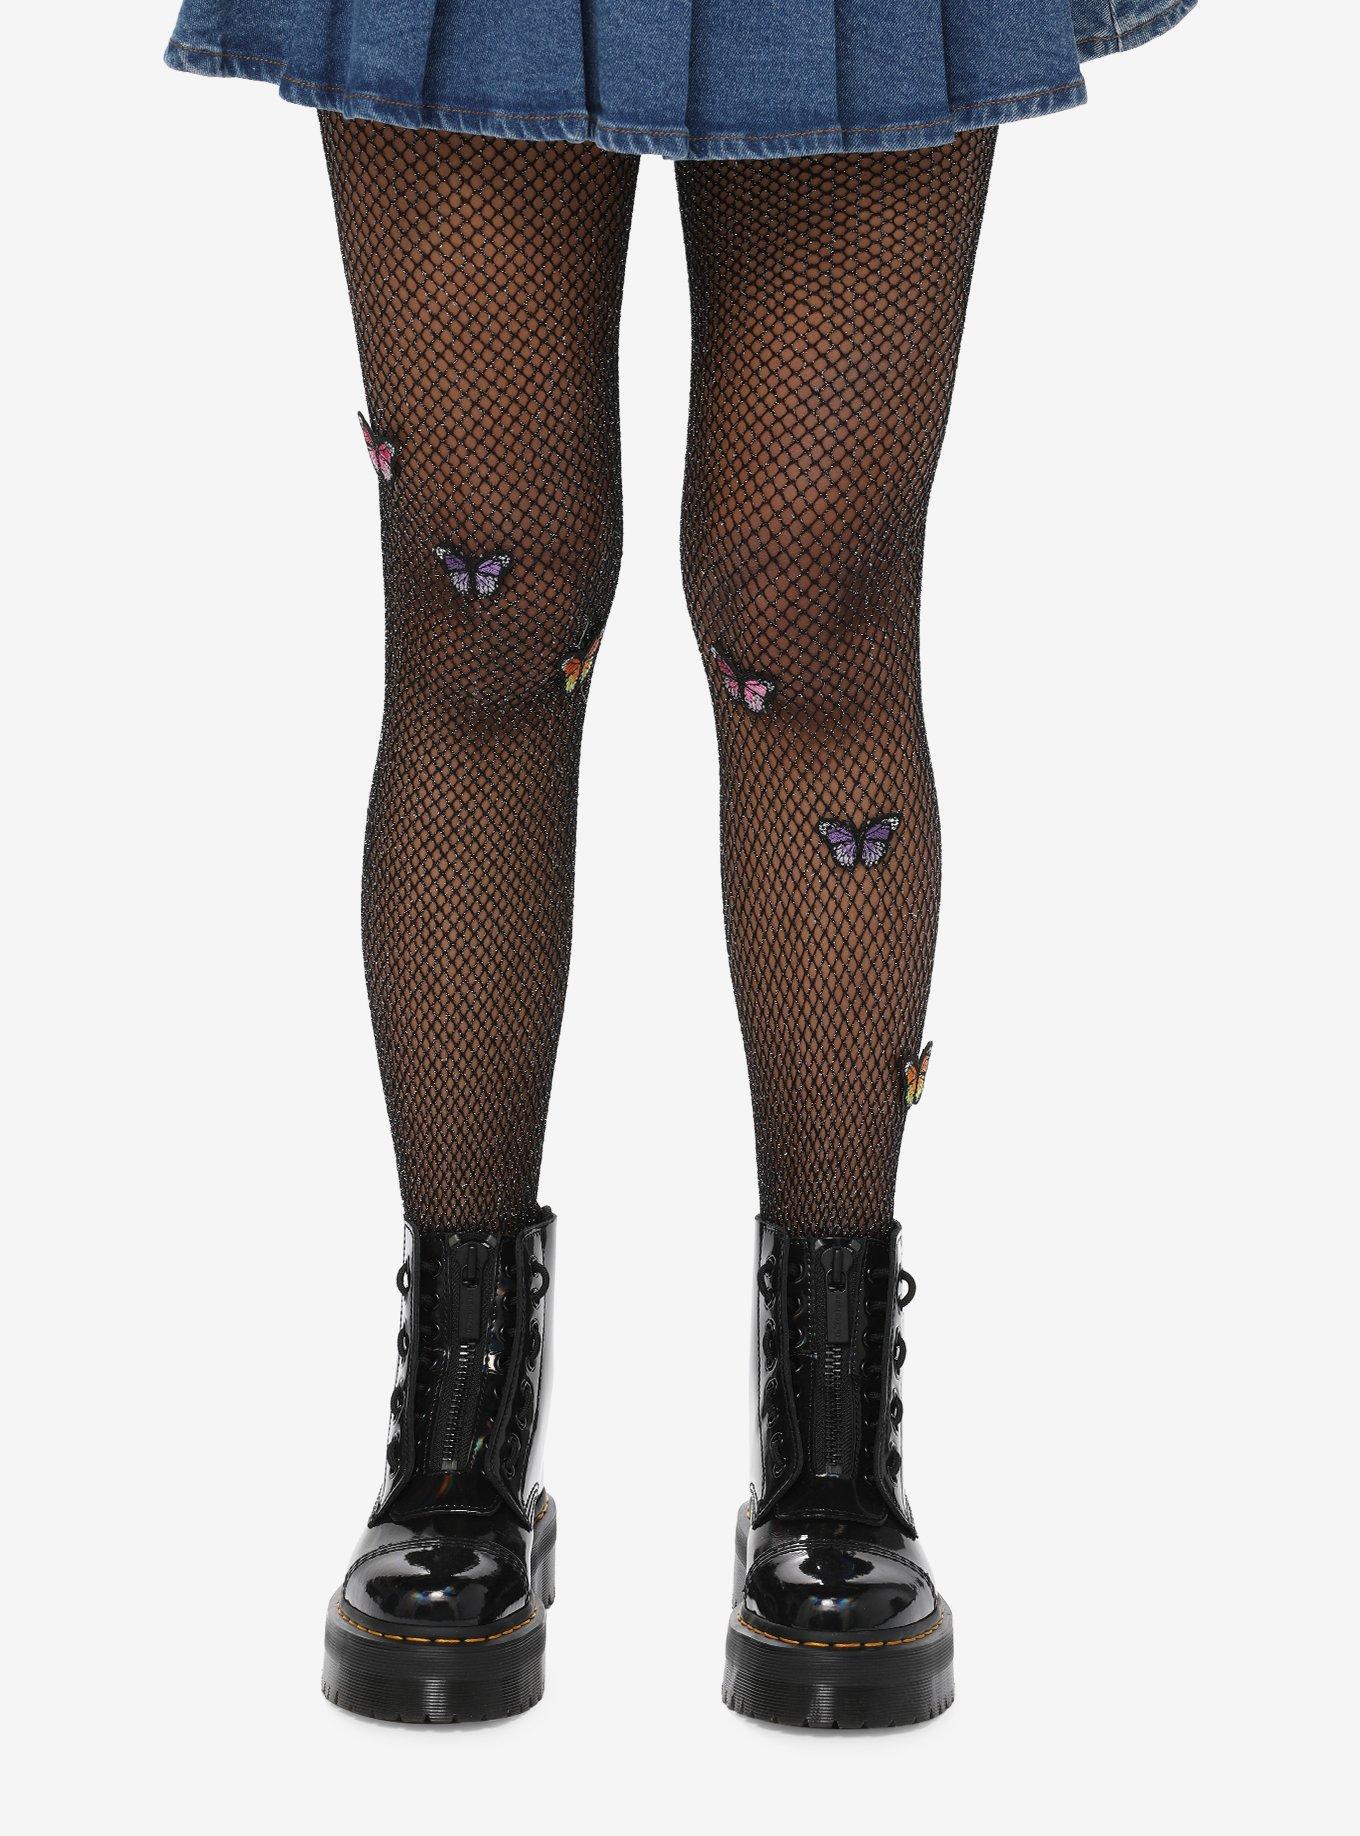 Hot Topic Black Floral Fishnet Tights